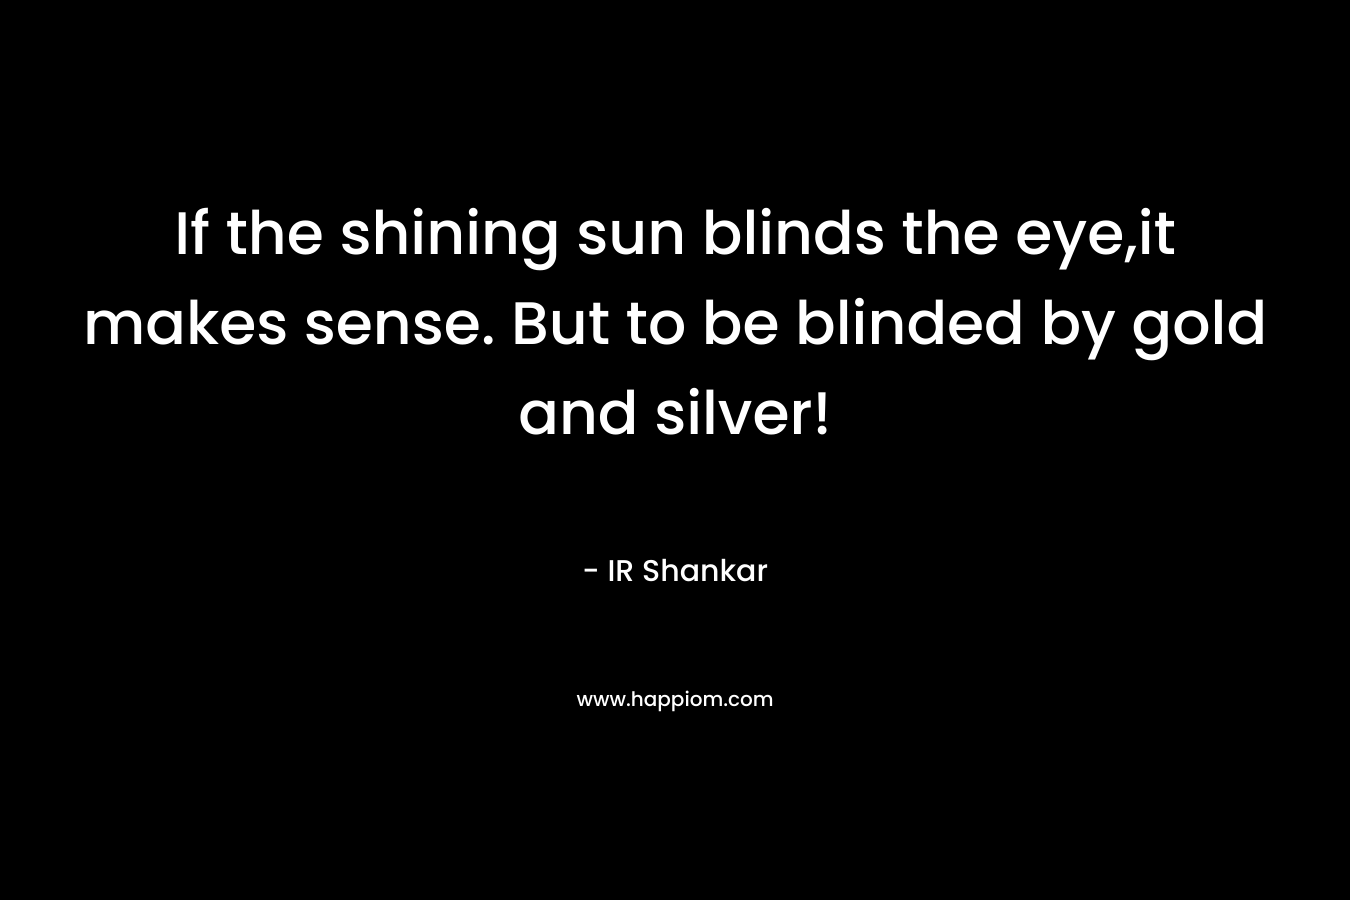 If the shining sun blinds the eye,it makes sense. But to be blinded by gold and silver!